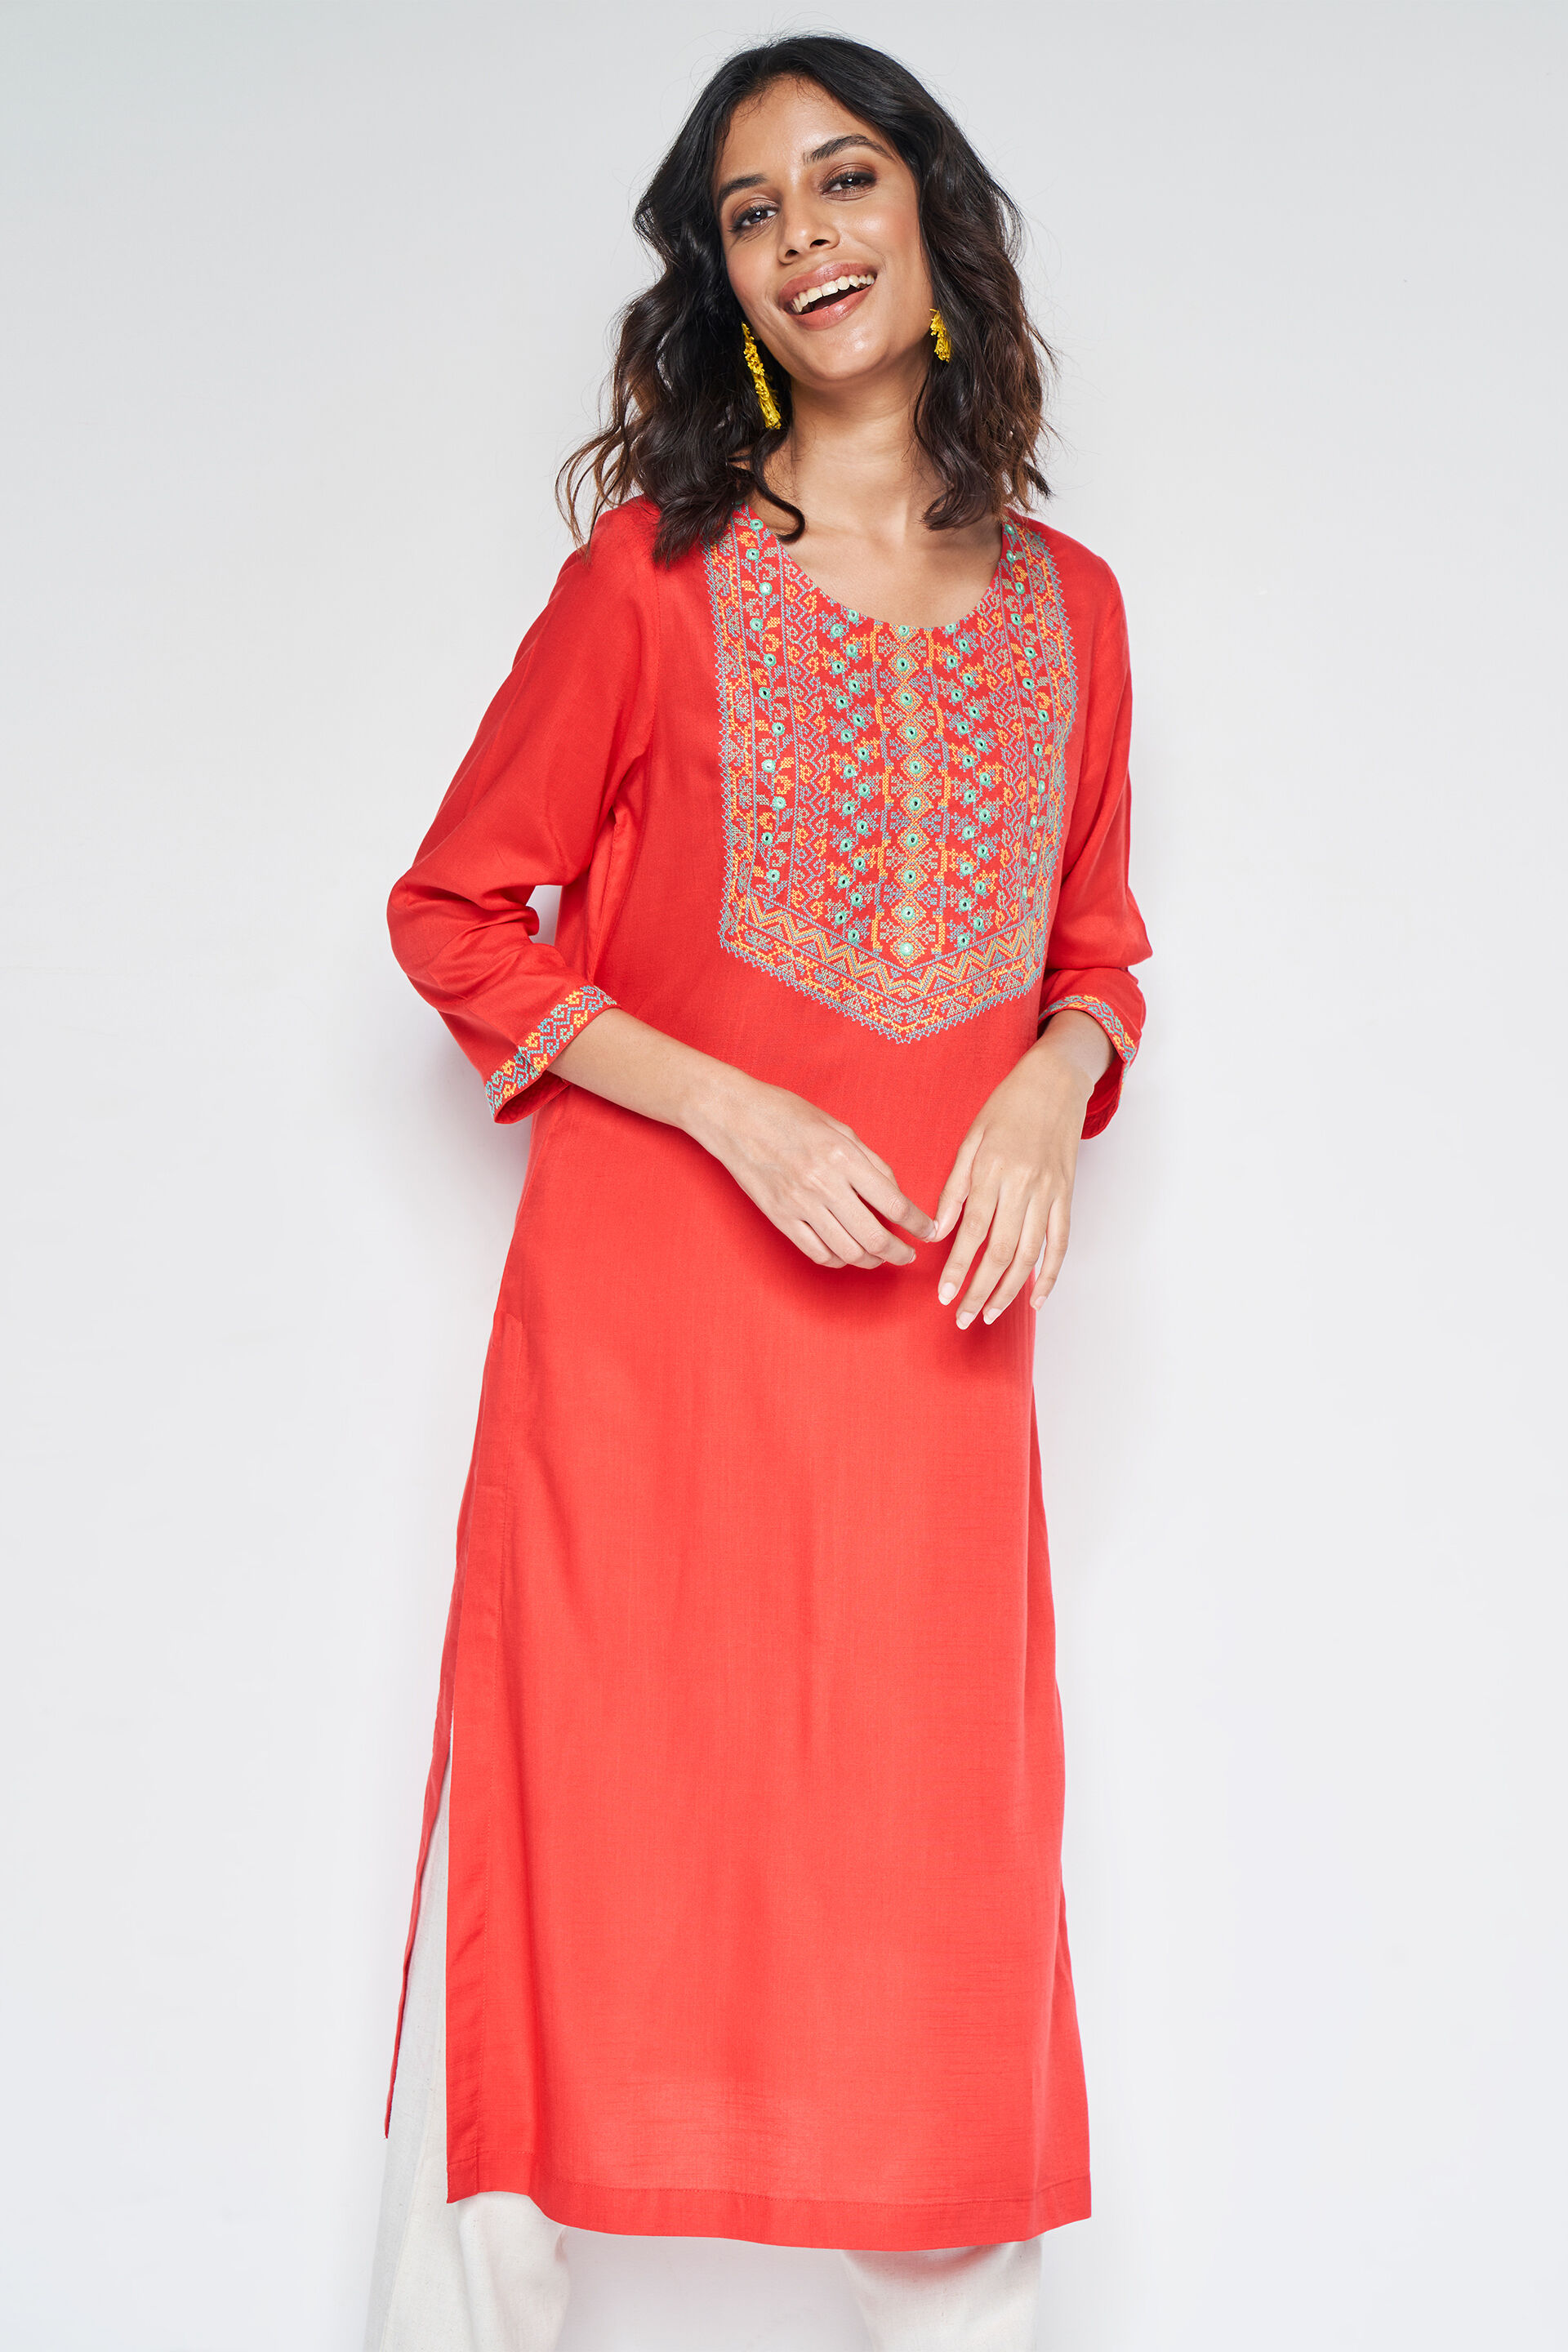 Details more than 112 long red kurti designs best